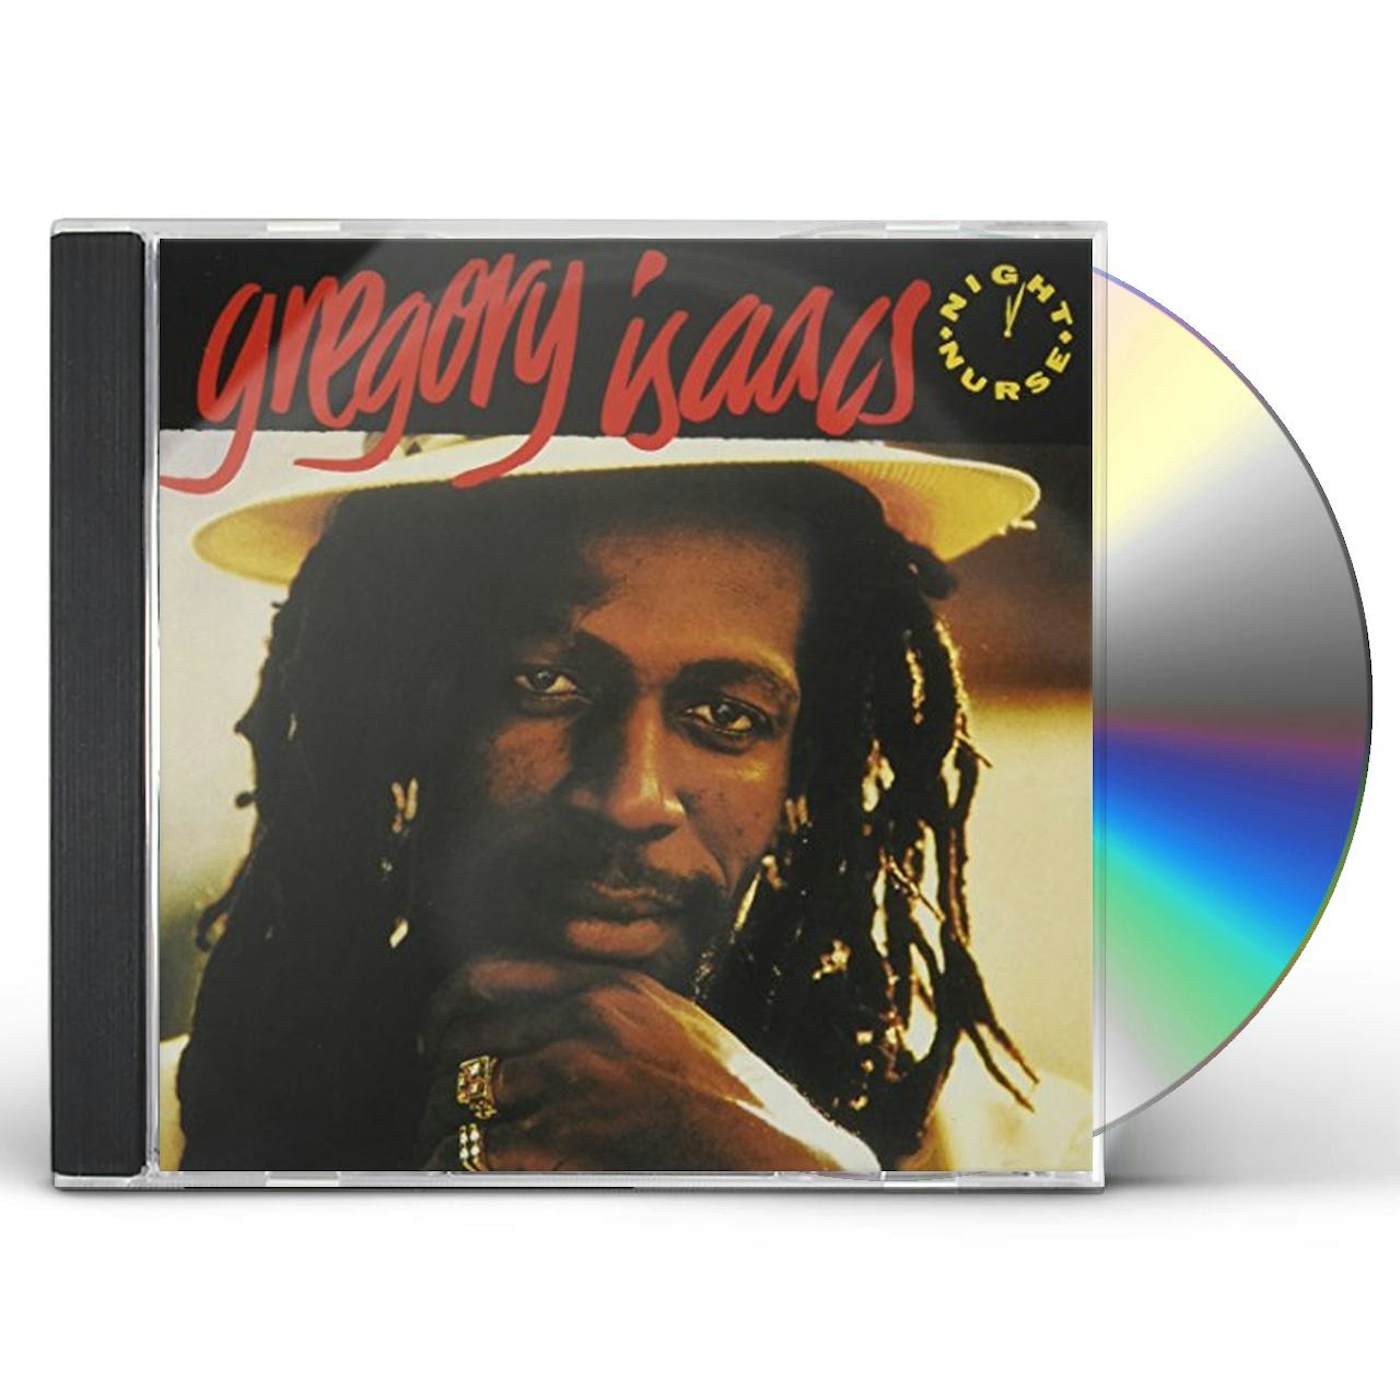 Gregory Isaacs MORE GREGORY + NIGHT NURSE CD